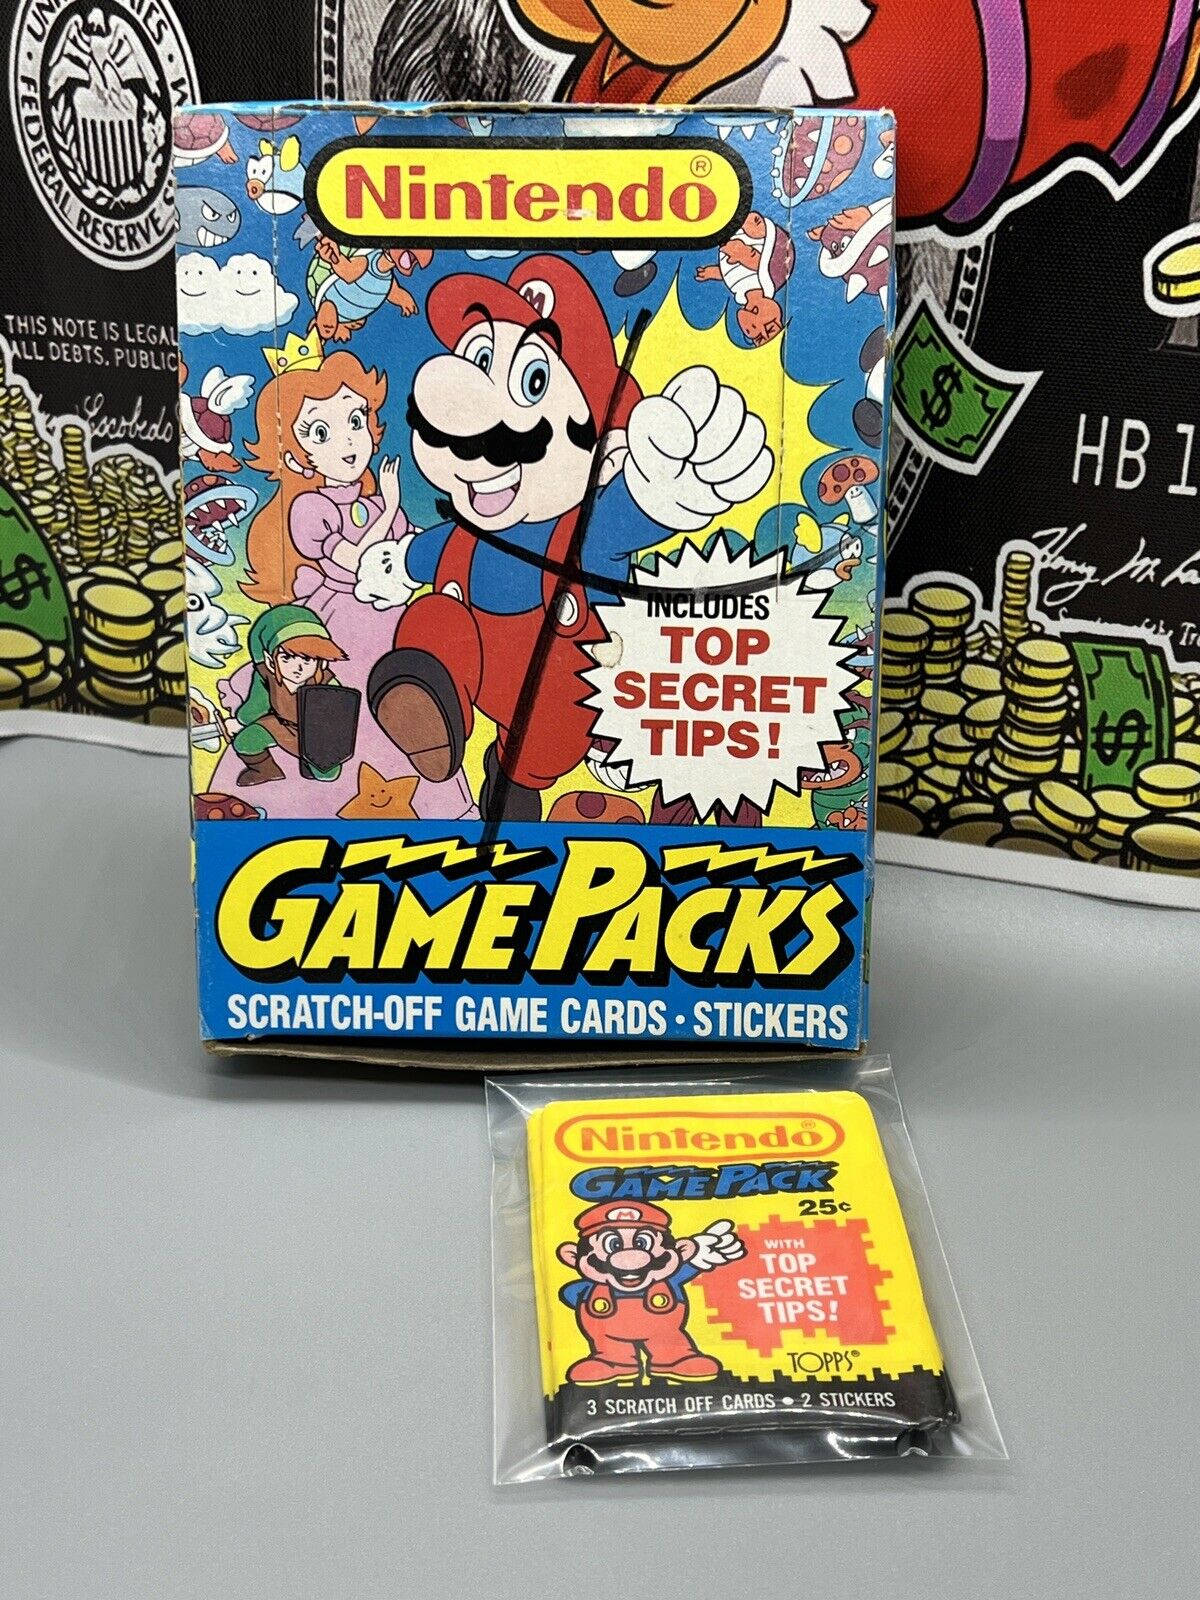 1989 Topps Nintendo Game Packs Empty Box & Wax Wrappers SET OF 3